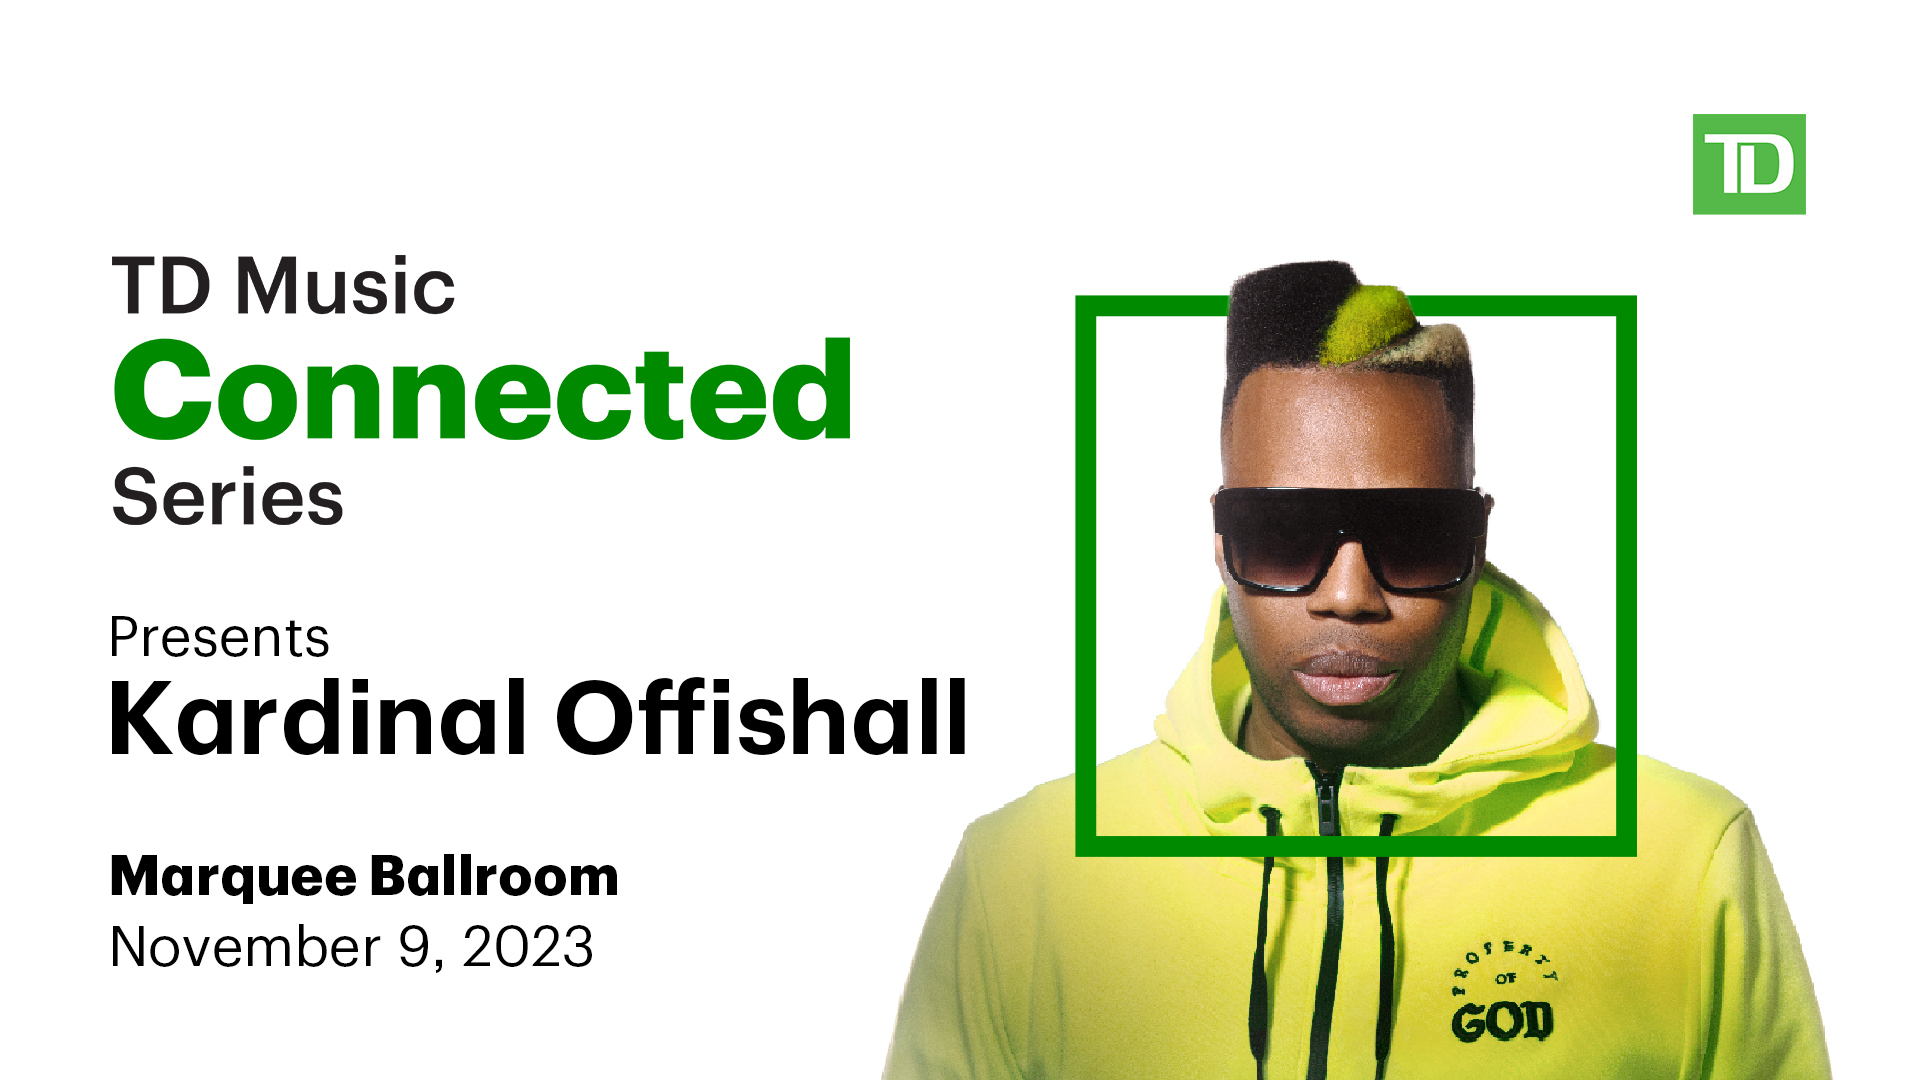 TD Music Connected Series presents Kardinal Offishall at The Marquee Ballroom! Free show!, Halifax, Nova Scotia, Canada